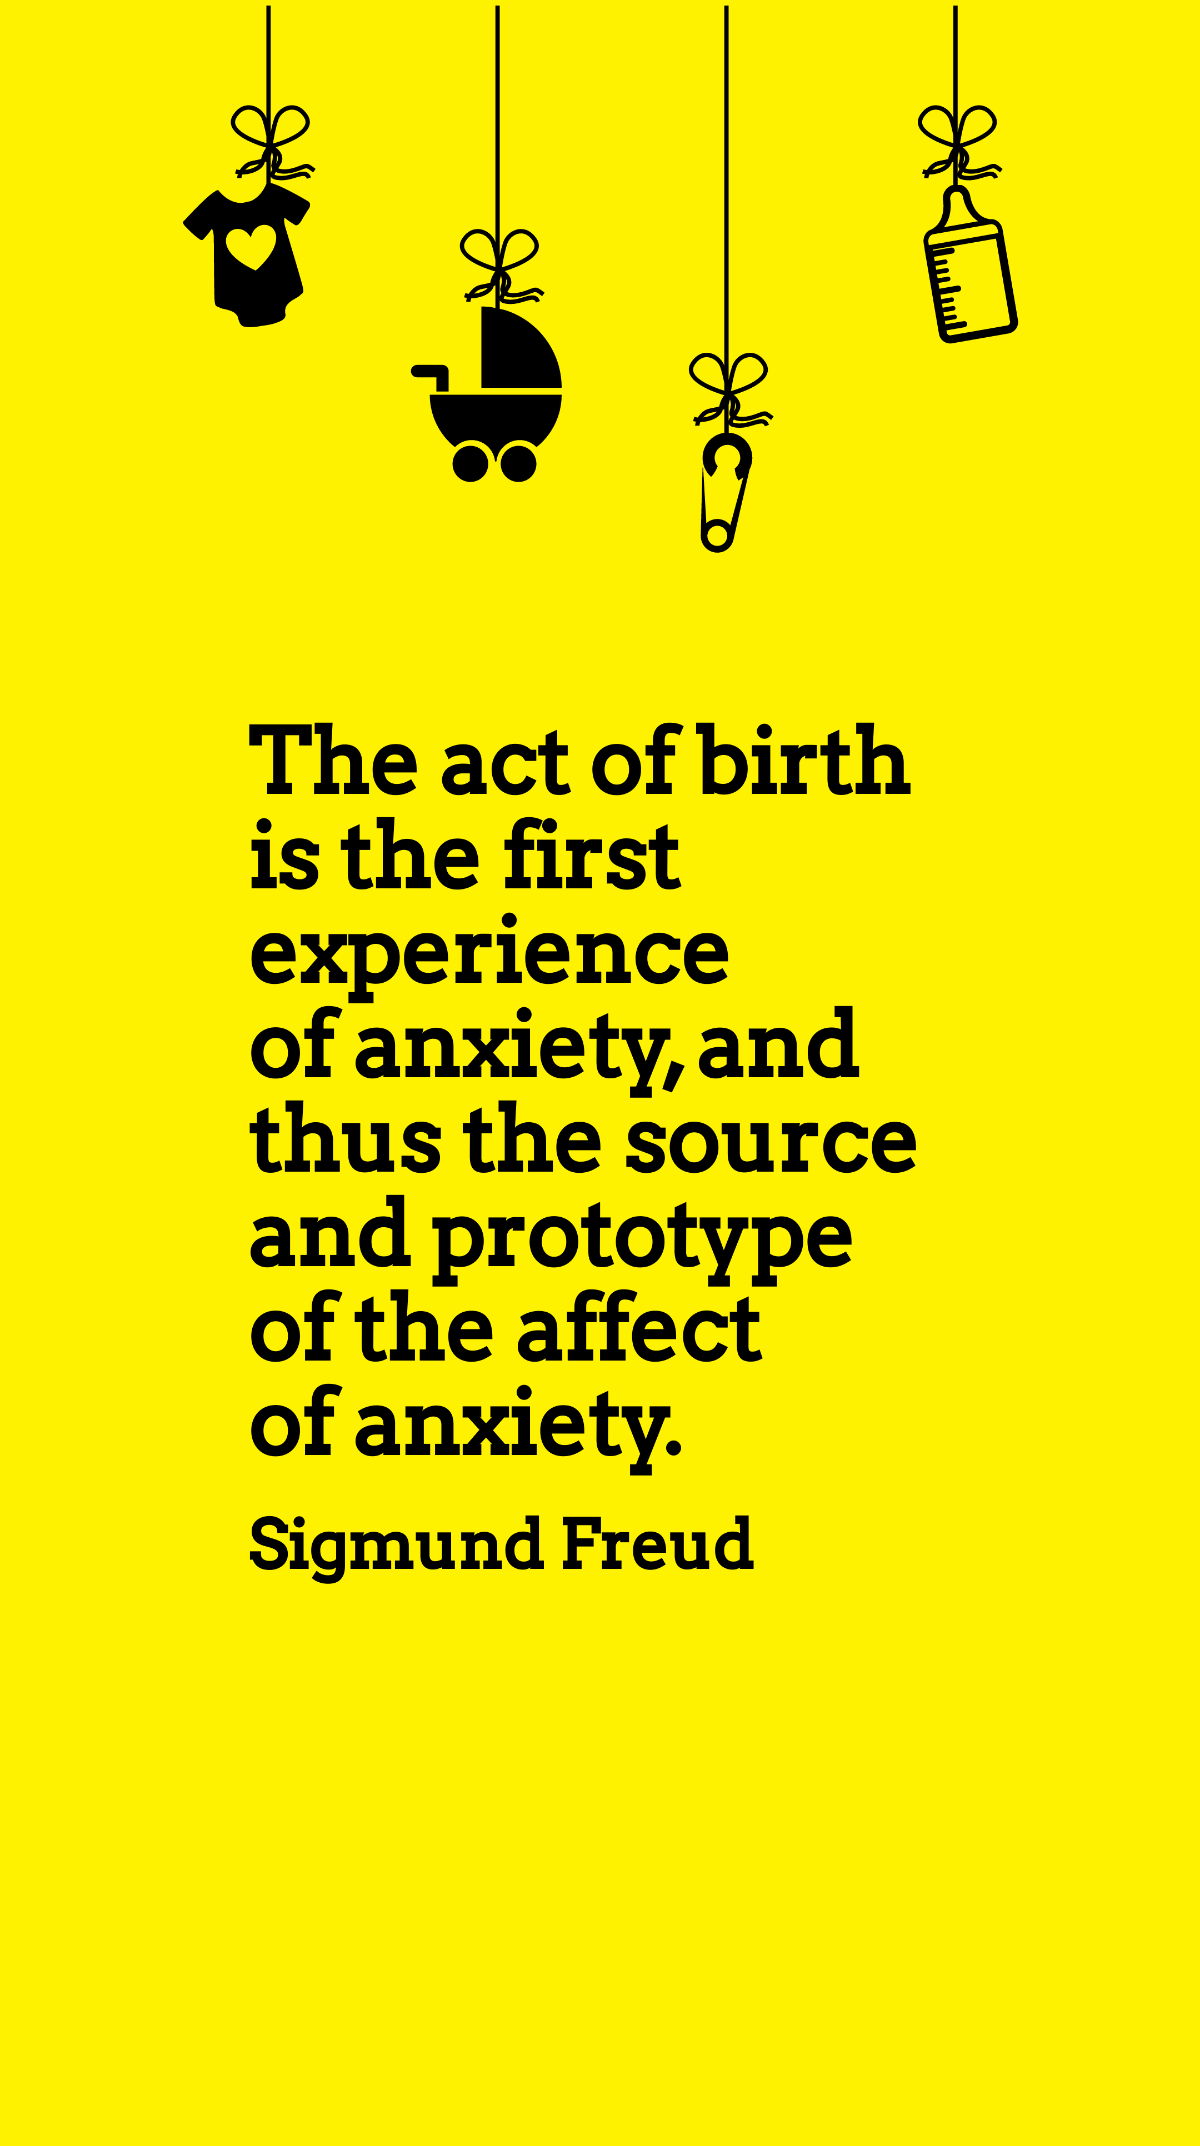 Sigmund Freud - The act of birth is the first experience of anxiety, and thus the source and prototype of the affect of anxiety.